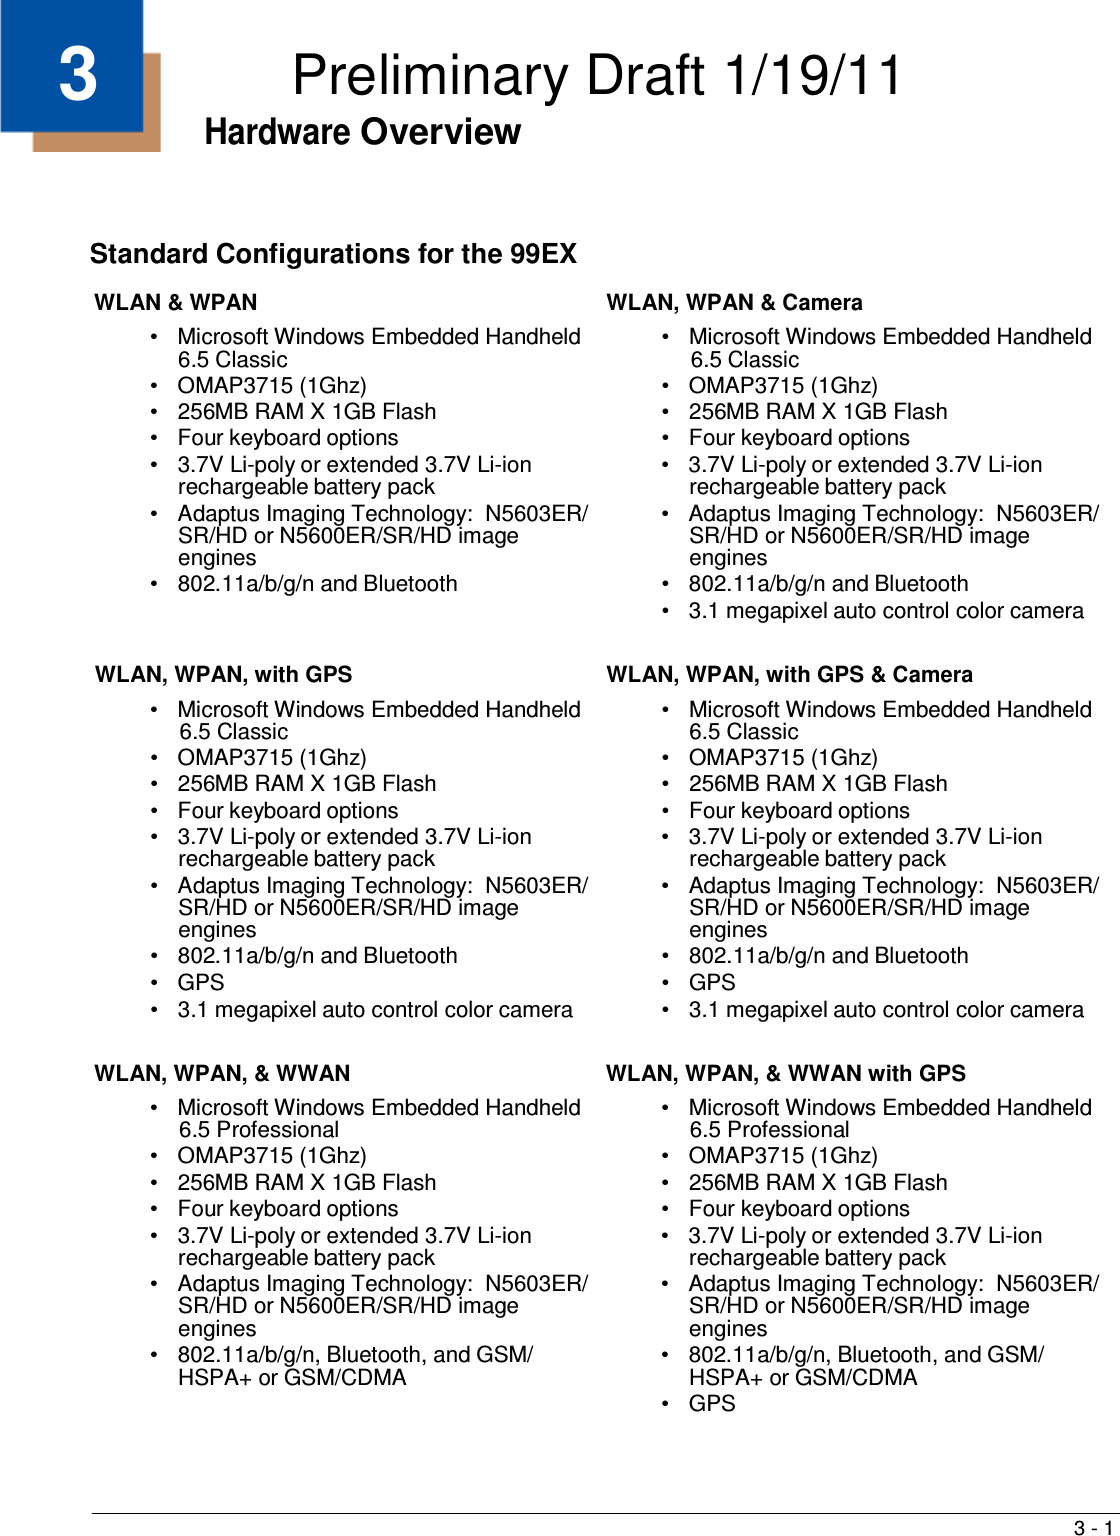 3 - 1   3  Preliminary Draft 1/19/11 Hardware Overview     Standard Configurations for the 99EX  WLAN &amp; WPAN •   Microsoft Windows Embedded Handheld 6.5 Classic •   OMAP3715 (1Ghz) •   256MB RAM X 1GB Flash •   Four keyboard options •   3.7V Li-poly or extended 3.7V Li-ion rechargeable battery pack •   Adaptus Imaging Technology:  N5603ER/ SR/HD or N5600ER/SR/HD image engines •   802.11a/b/g/n and Bluetooth WLAN, WPAN &amp; Camera •   Microsoft Windows Embedded Handheld 6.5 Classic •   OMAP3715 (1Ghz) •   256MB RAM X 1GB Flash •   Four keyboard options •   3.7V Li-poly or extended 3.7V Li-ion rechargeable battery pack •   Adaptus Imaging Technology:  N5603ER/ SR/HD or N5600ER/SR/HD image engines •   802.11a/b/g/n and Bluetooth •   3.1 megapixel auto control color camera   WLAN, WPAN, with GPS •   Microsoft Windows Embedded Handheld 6.5 Classic •   OMAP3715 (1Ghz) •   256MB RAM X 1GB Flash •   Four keyboard options •   3.7V Li-poly or extended 3.7V Li-ion rechargeable battery pack •   Adaptus Imaging Technology:  N5603ER/ SR/HD or N5600ER/SR/HD image engines •   802.11a/b/g/n and Bluetooth •   GPS •   3.1 megapixel auto control color camera WLAN, WPAN, with GPS &amp; Camera •   Microsoft Windows Embedded Handheld 6.5 Classic •   OMAP3715 (1Ghz) •   256MB RAM X 1GB Flash •   Four keyboard options •   3.7V Li-poly or extended 3.7V Li-ion rechargeable battery pack •   Adaptus Imaging Technology:  N5603ER/ SR/HD or N5600ER/SR/HD image engines •   802.11a/b/g/n and Bluetooth •   GPS •   3.1 megapixel auto control color camera   WLAN, WPAN, &amp; WWAN •   Microsoft Windows Embedded Handheld 6.5 Professional •   OMAP3715 (1Ghz) •   256MB RAM X 1GB Flash •   Four keyboard options •   3.7V Li-poly or extended 3.7V Li-ion rechargeable battery pack •   Adaptus Imaging Technology:  N5603ER/ SR/HD or N5600ER/SR/HD image engines •   802.11a/b/g/n, Bluetooth, and GSM/ HSPA+ or GSM/CDMA WLAN, WPAN, &amp; WWAN with GPS •   Microsoft Windows Embedded Handheld 6.5 Professional •   OMAP3715 (1Ghz) •   256MB RAM X 1GB Flash •   Four keyboard options •   3.7V Li-poly or extended 3.7V Li-ion rechargeable battery pack •   Adaptus Imaging Technology:  N5603ER/ SR/HD or N5600ER/SR/HD image engines •   802.11a/b/g/n, Bluetooth, and GSM/ HSPA+ or GSM/CDMA •   GPS 